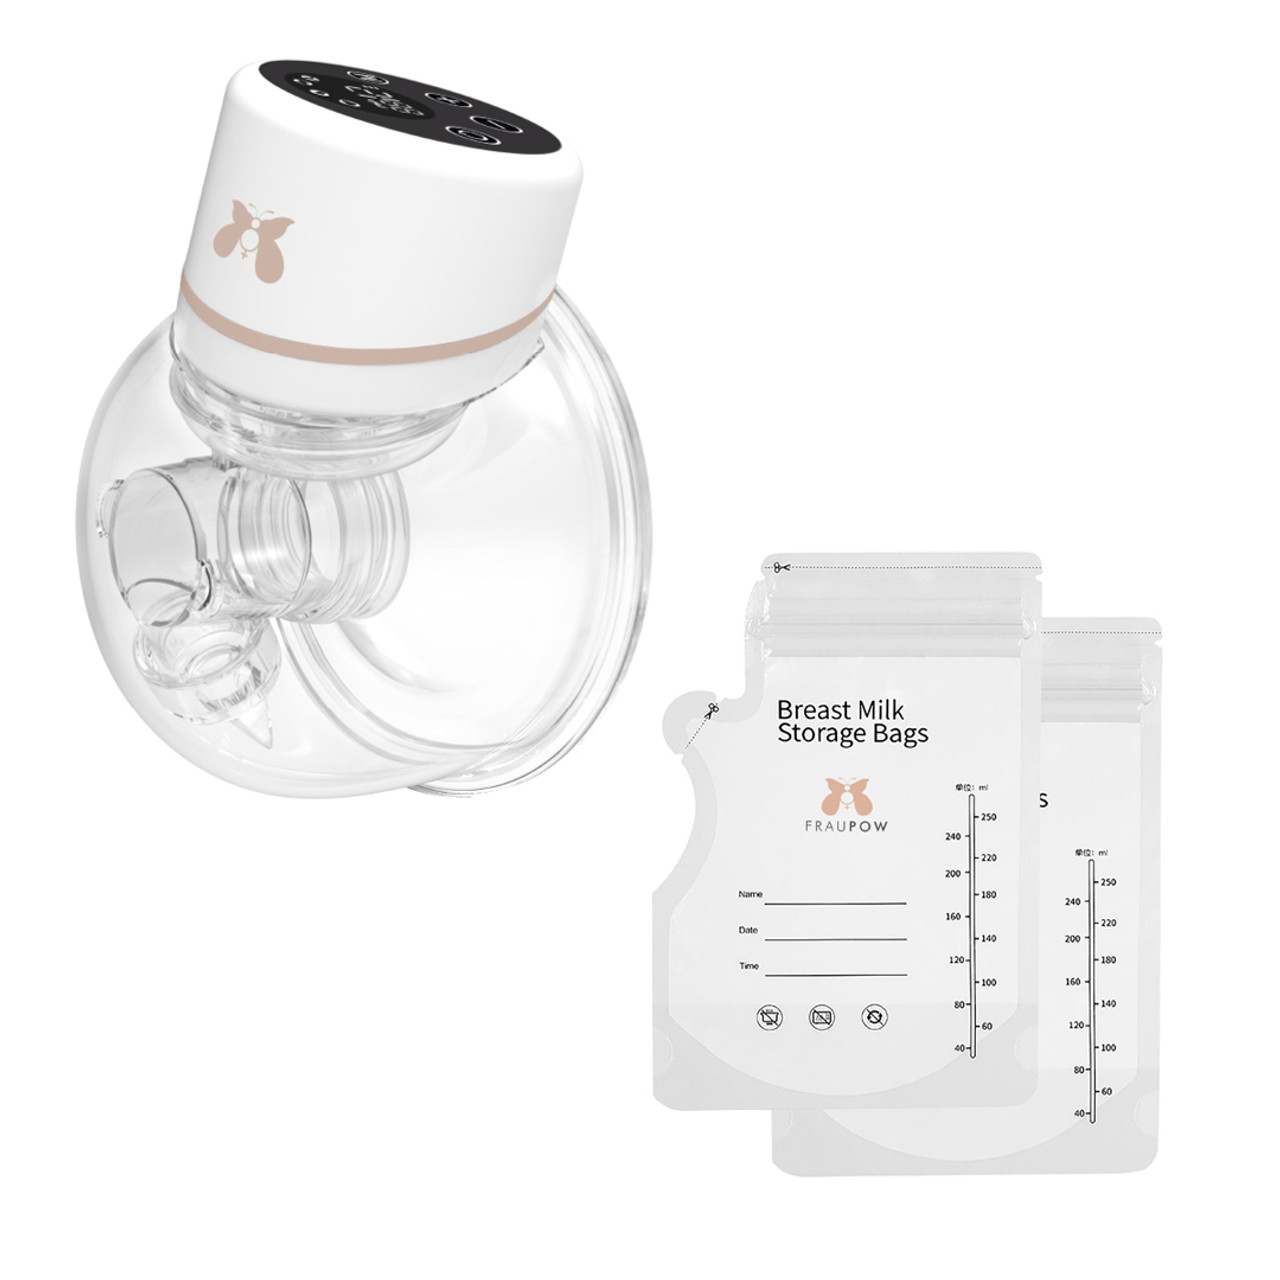 Fraupow Wearable Hands-Free Breast Pump